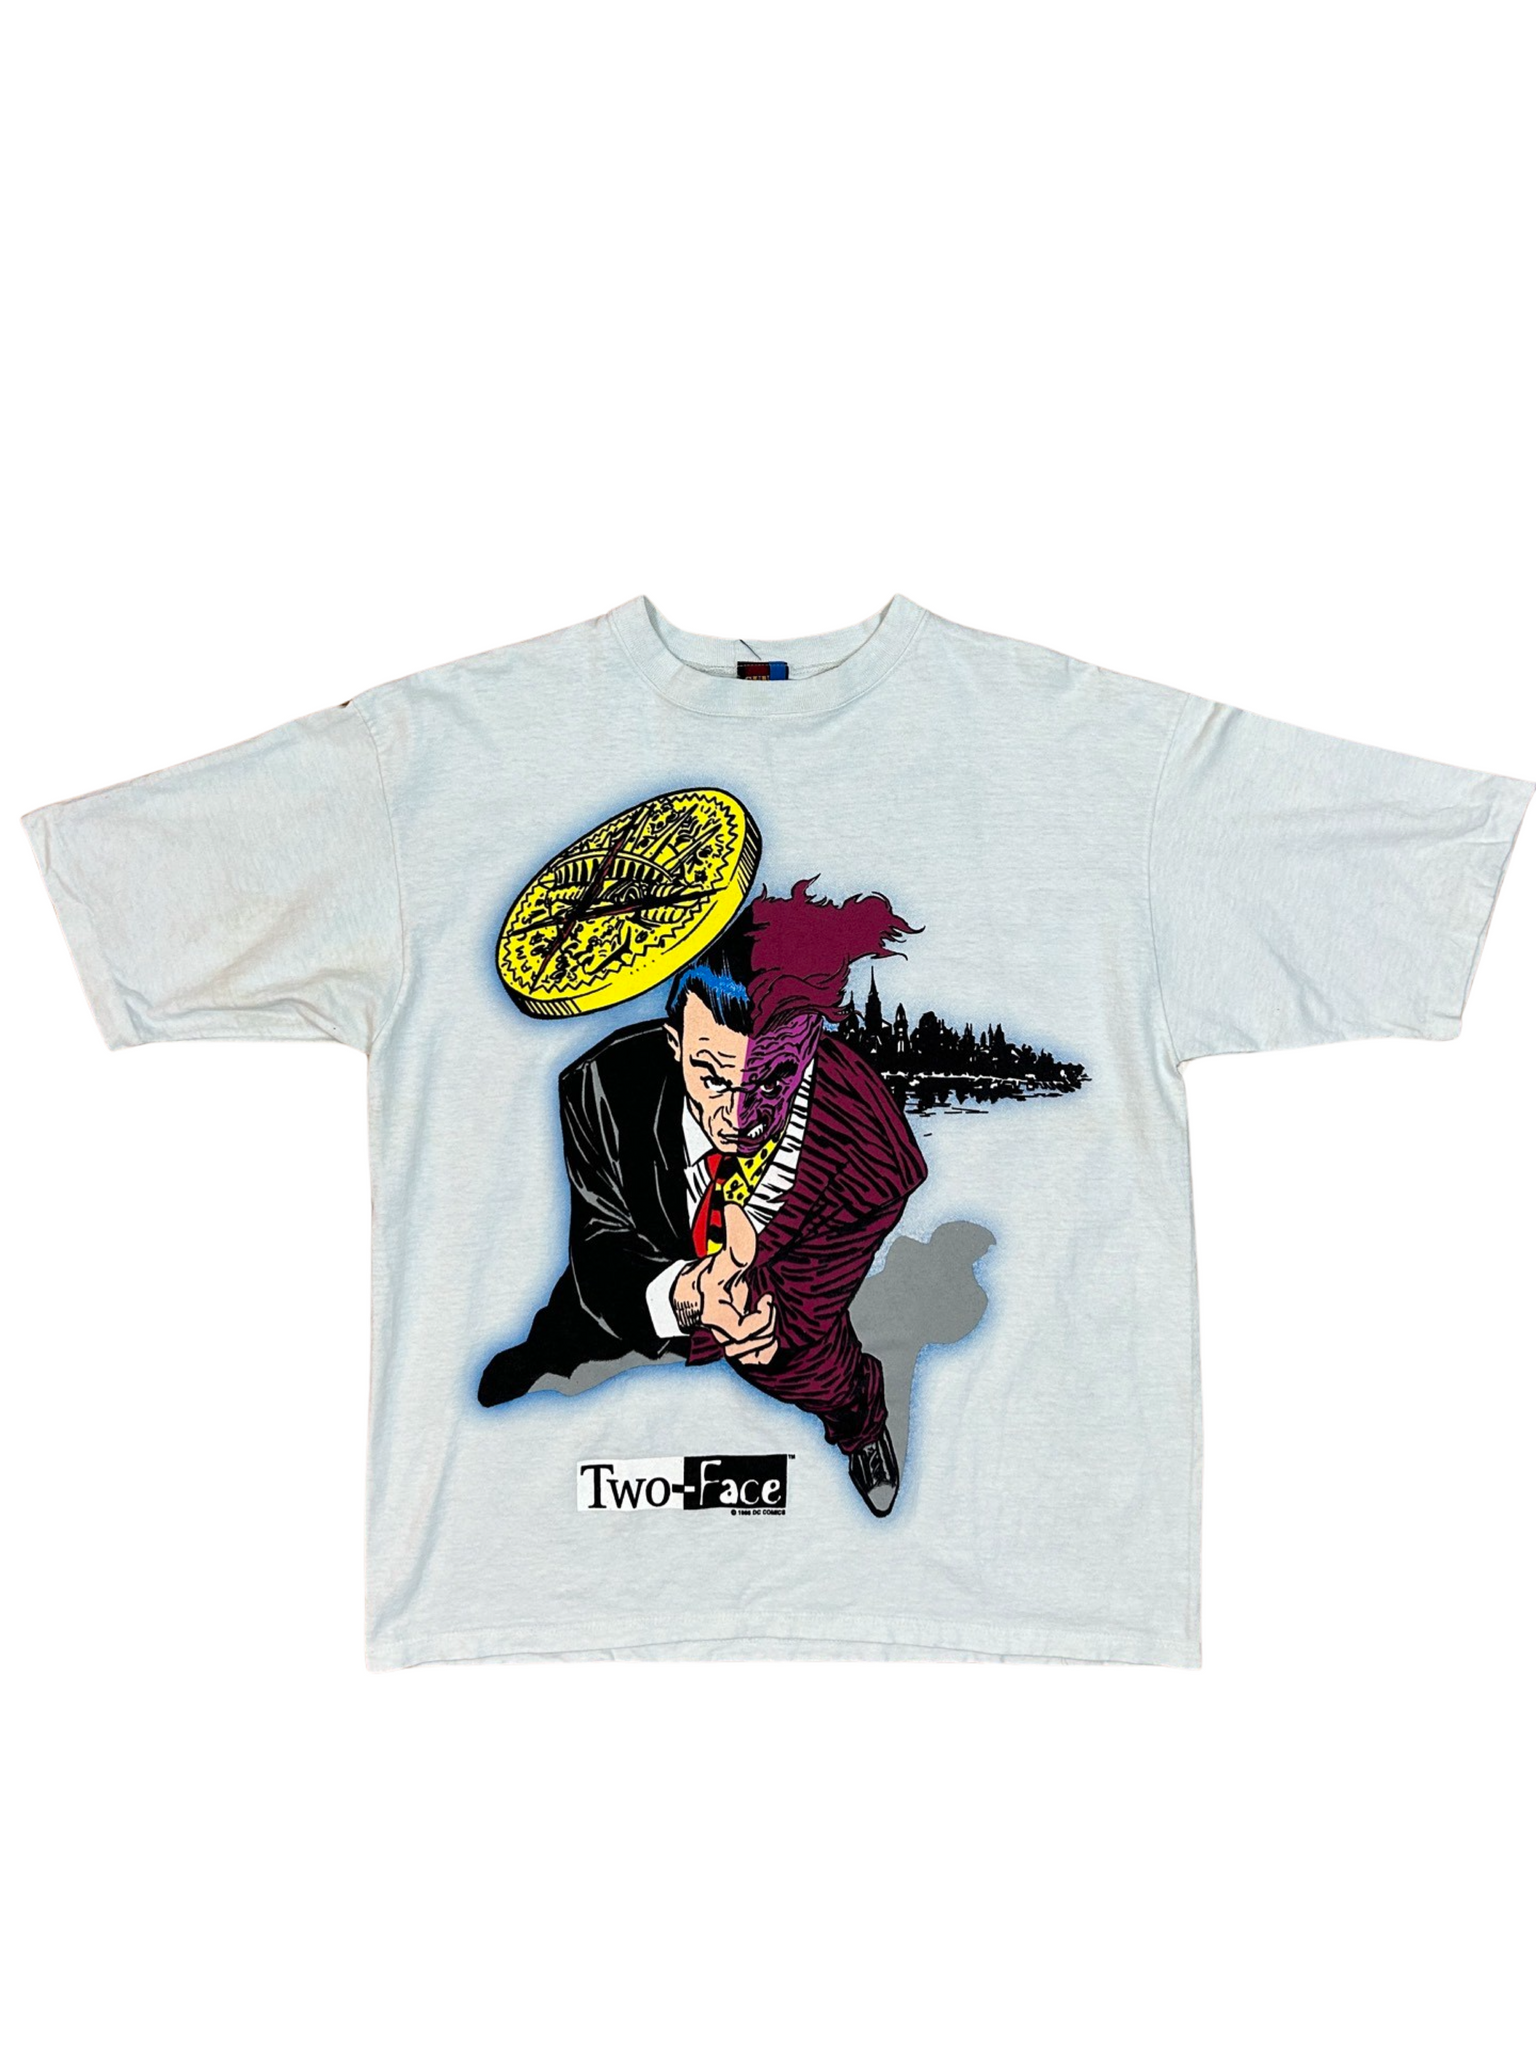 Two-Face tee